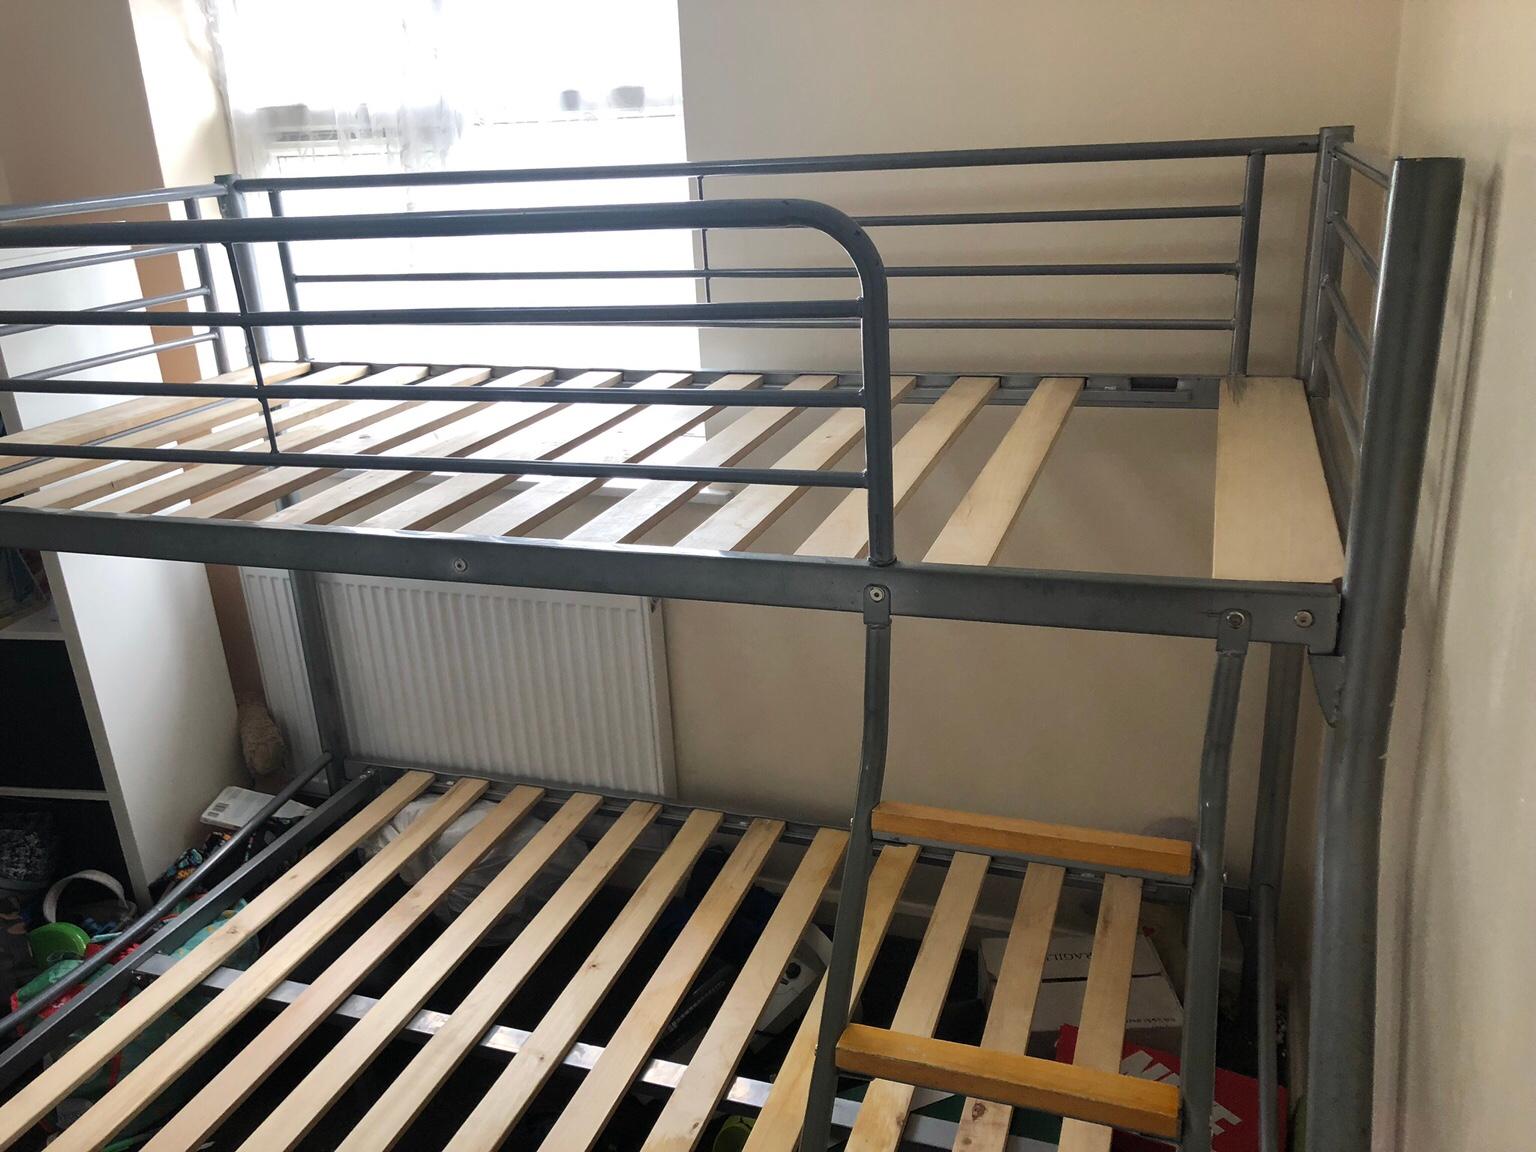 Bunk Bed And Tv Stand In London Borough, Bunk Bed Tv Stand